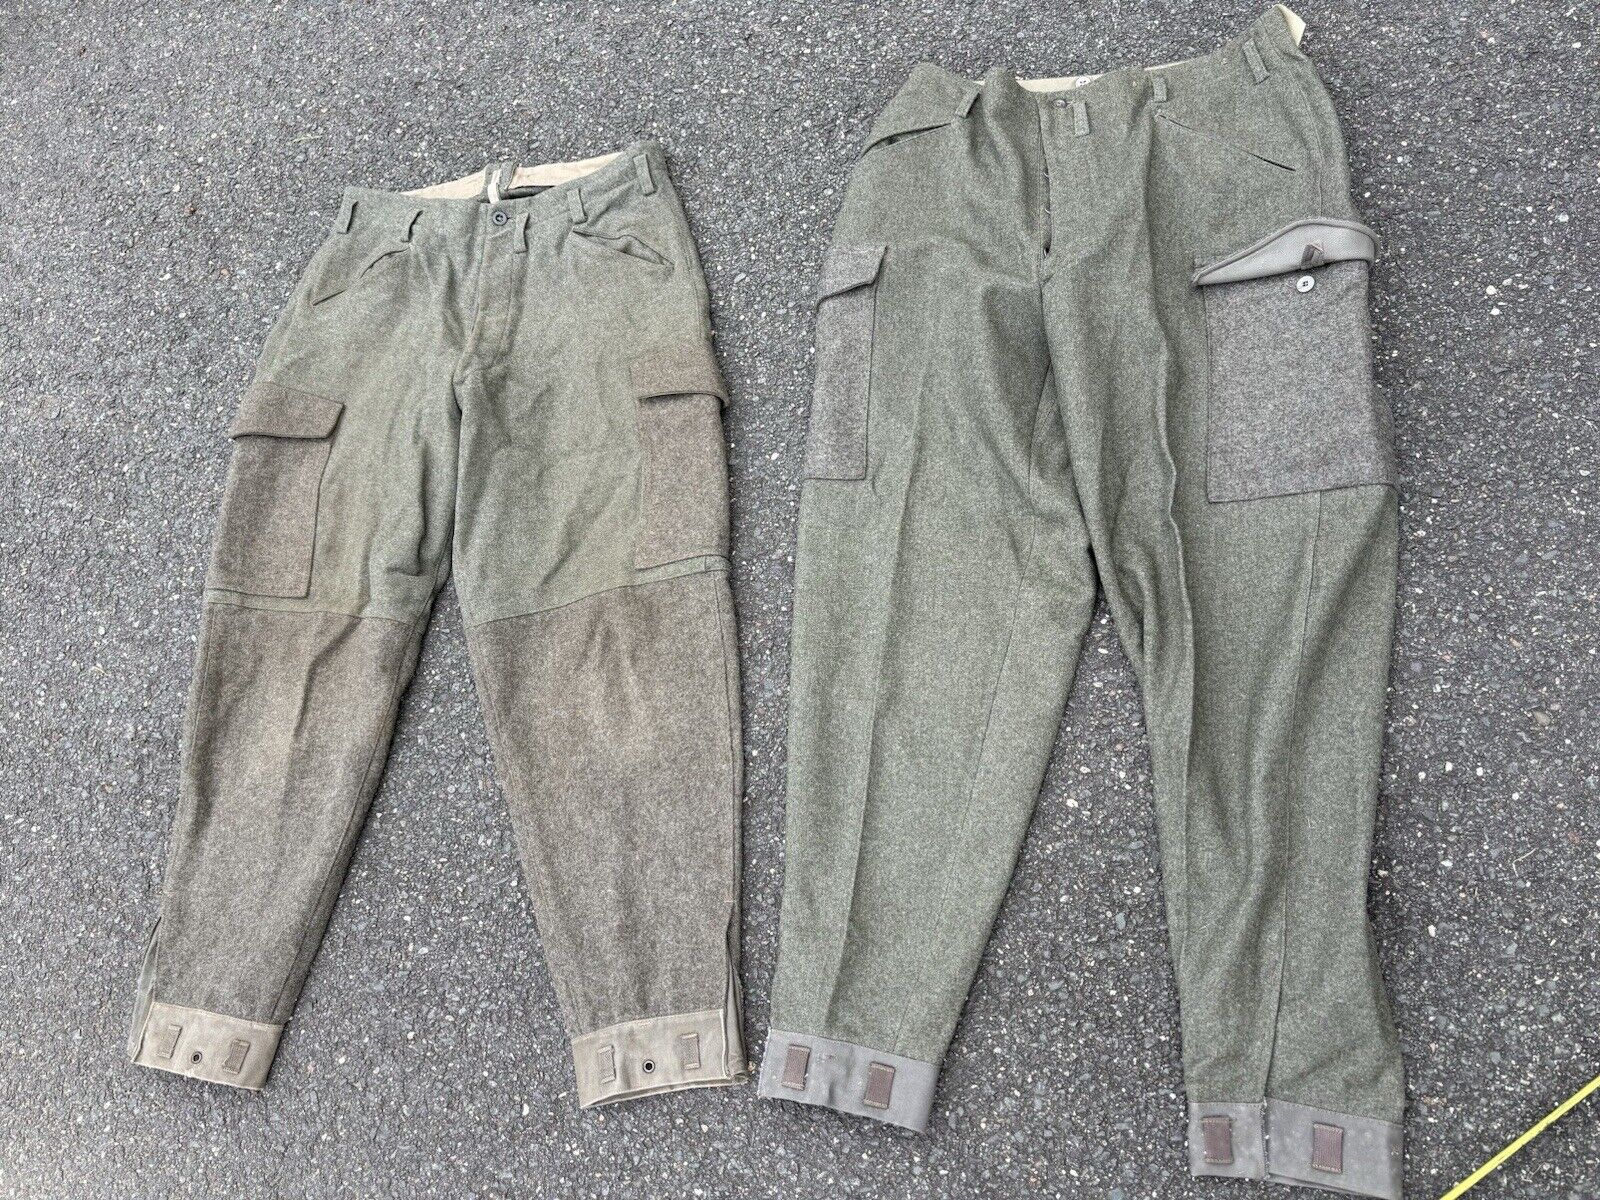 Swedish Army Trousers 1940s Lot Of 2 Pairs Size 36 Pants Wool  Military Vintage